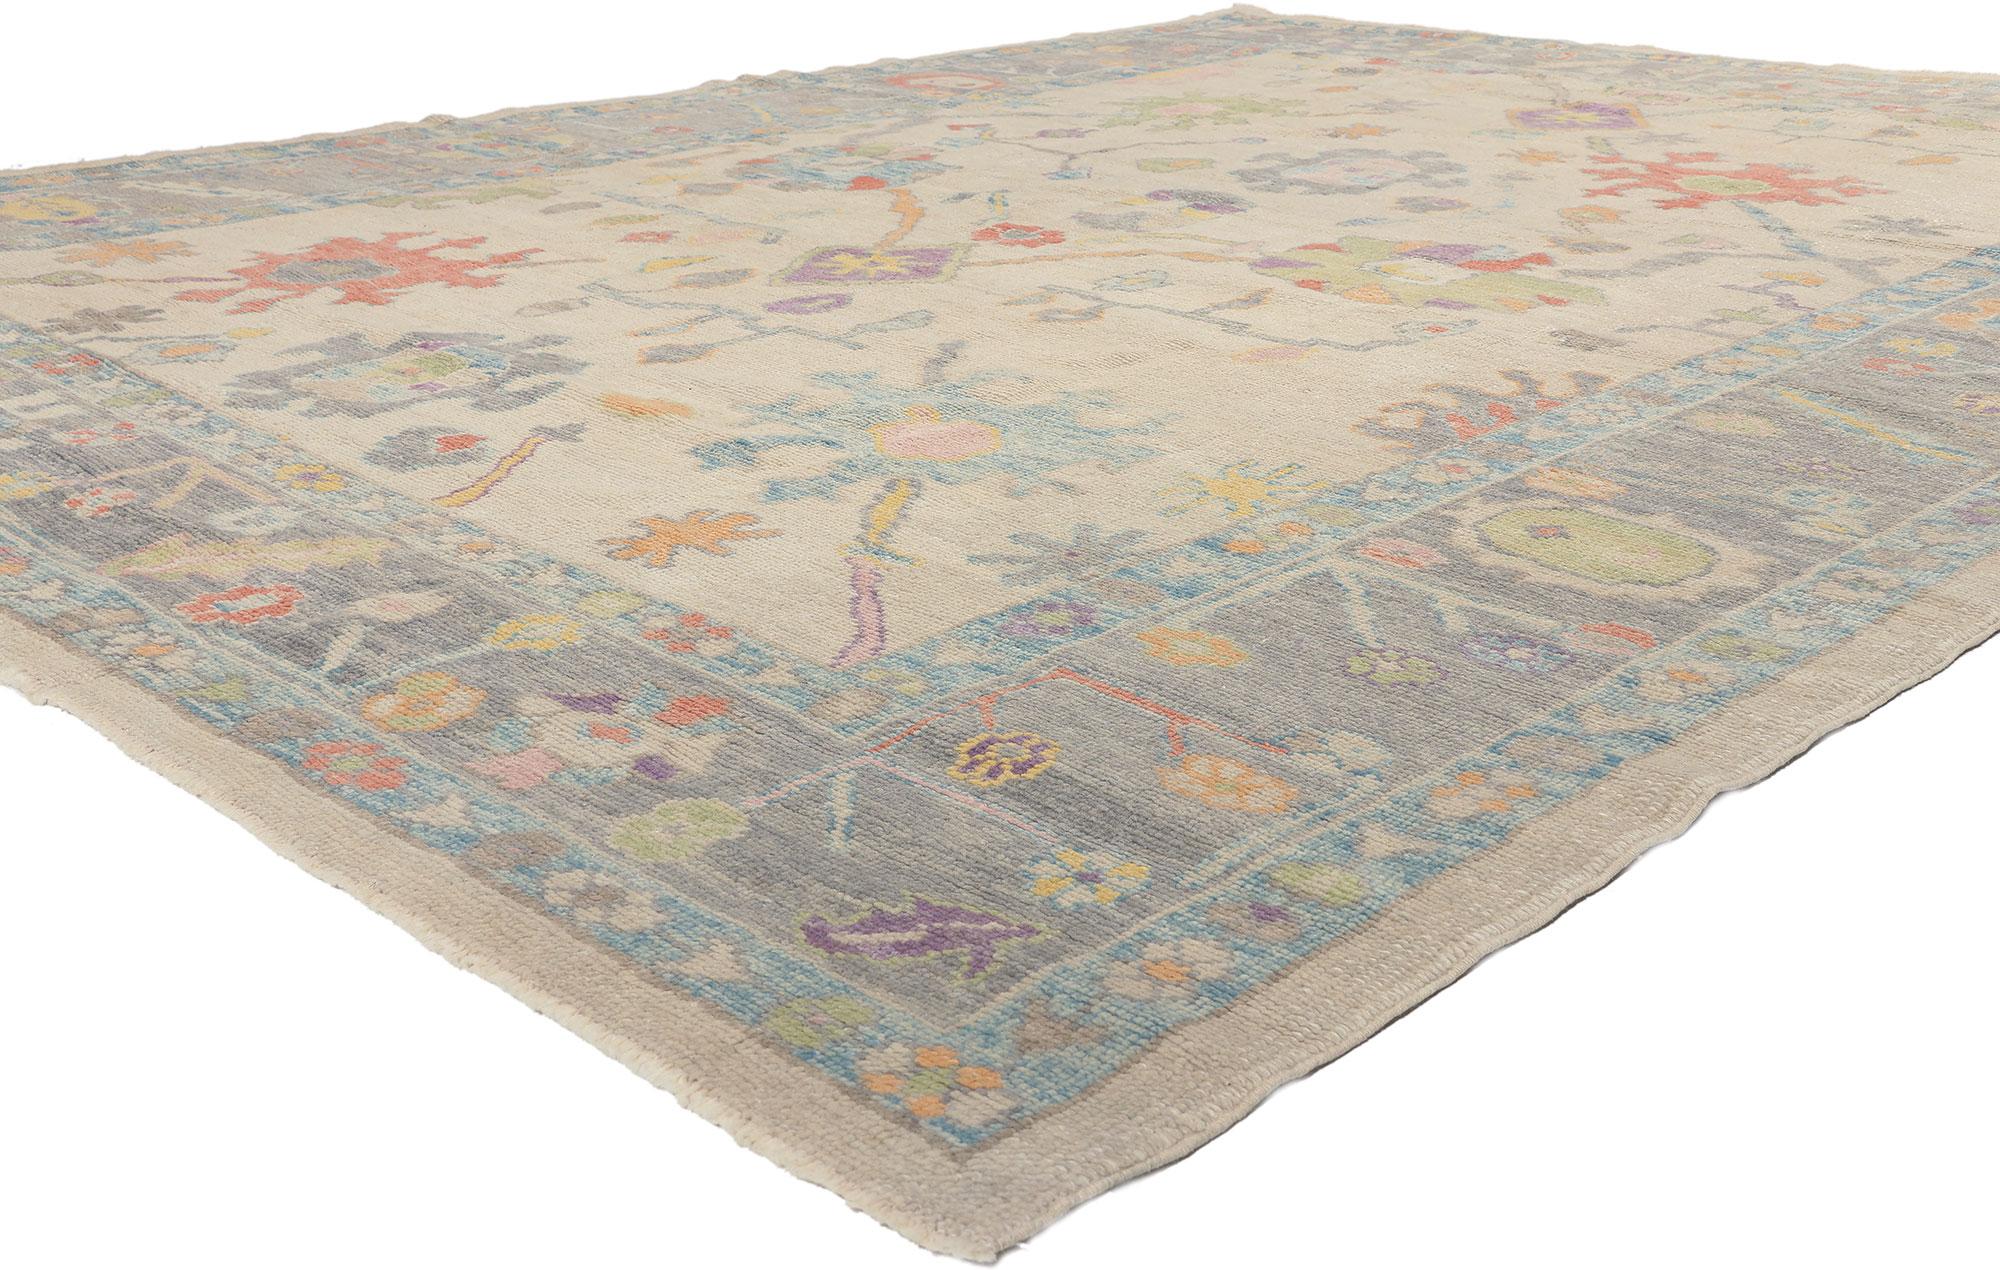 53607 Colorful Oushak Turkish Rug, 09'02 x 12'01.
Bridgerton Regencycore meets modern style in this hand-knotted wool colorful Turkish Oushak rug. The nature-inspired design and colorful earth-tones woven into this piece work together creating a